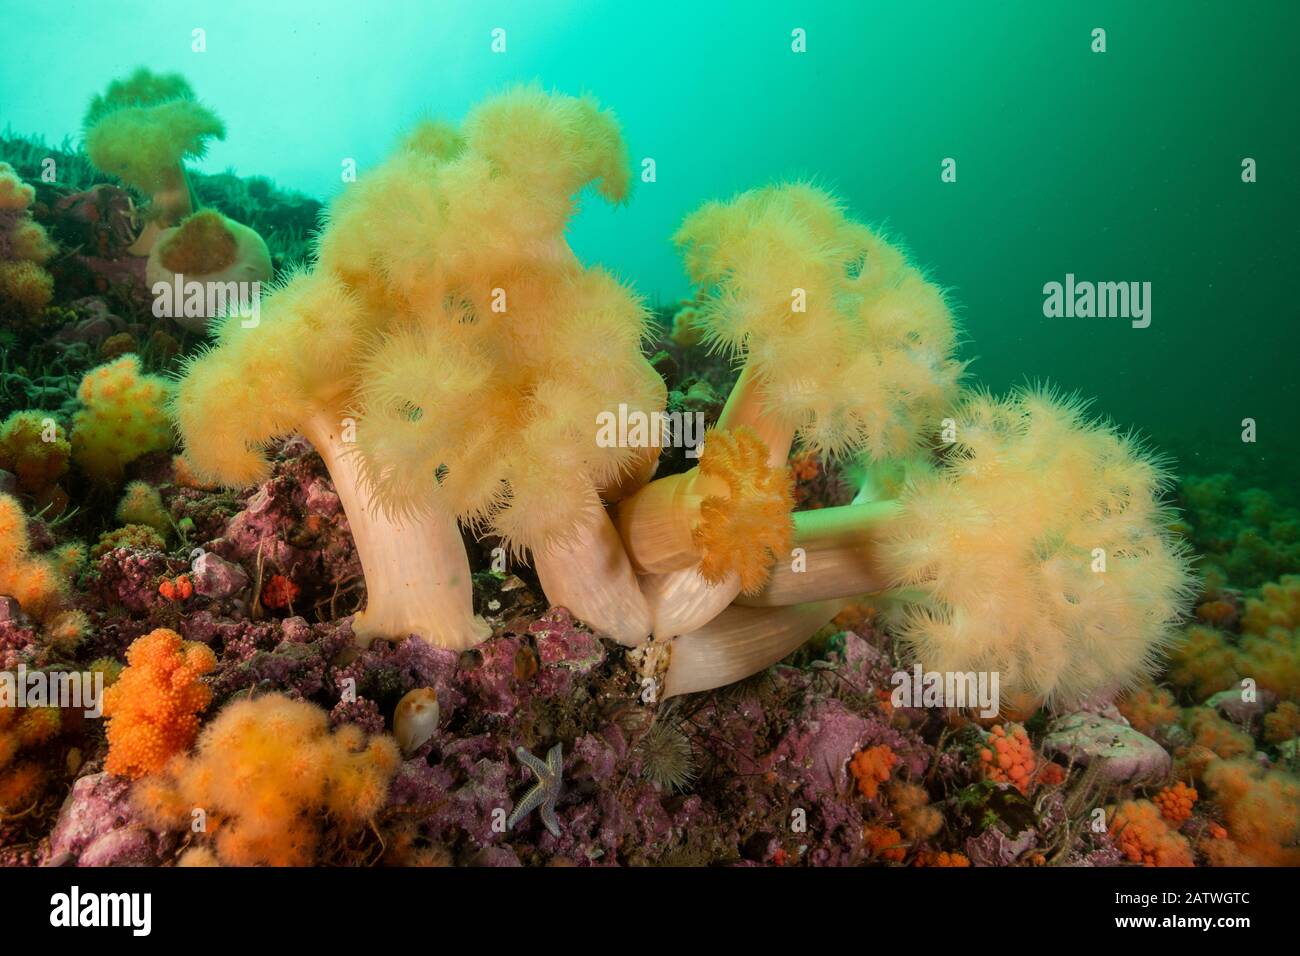 A group of frilled anemones (Metridium senile) off Bonaventure Island in the Gulf of Saint Lawrence, Quebec, Canada. September. Stock Photo